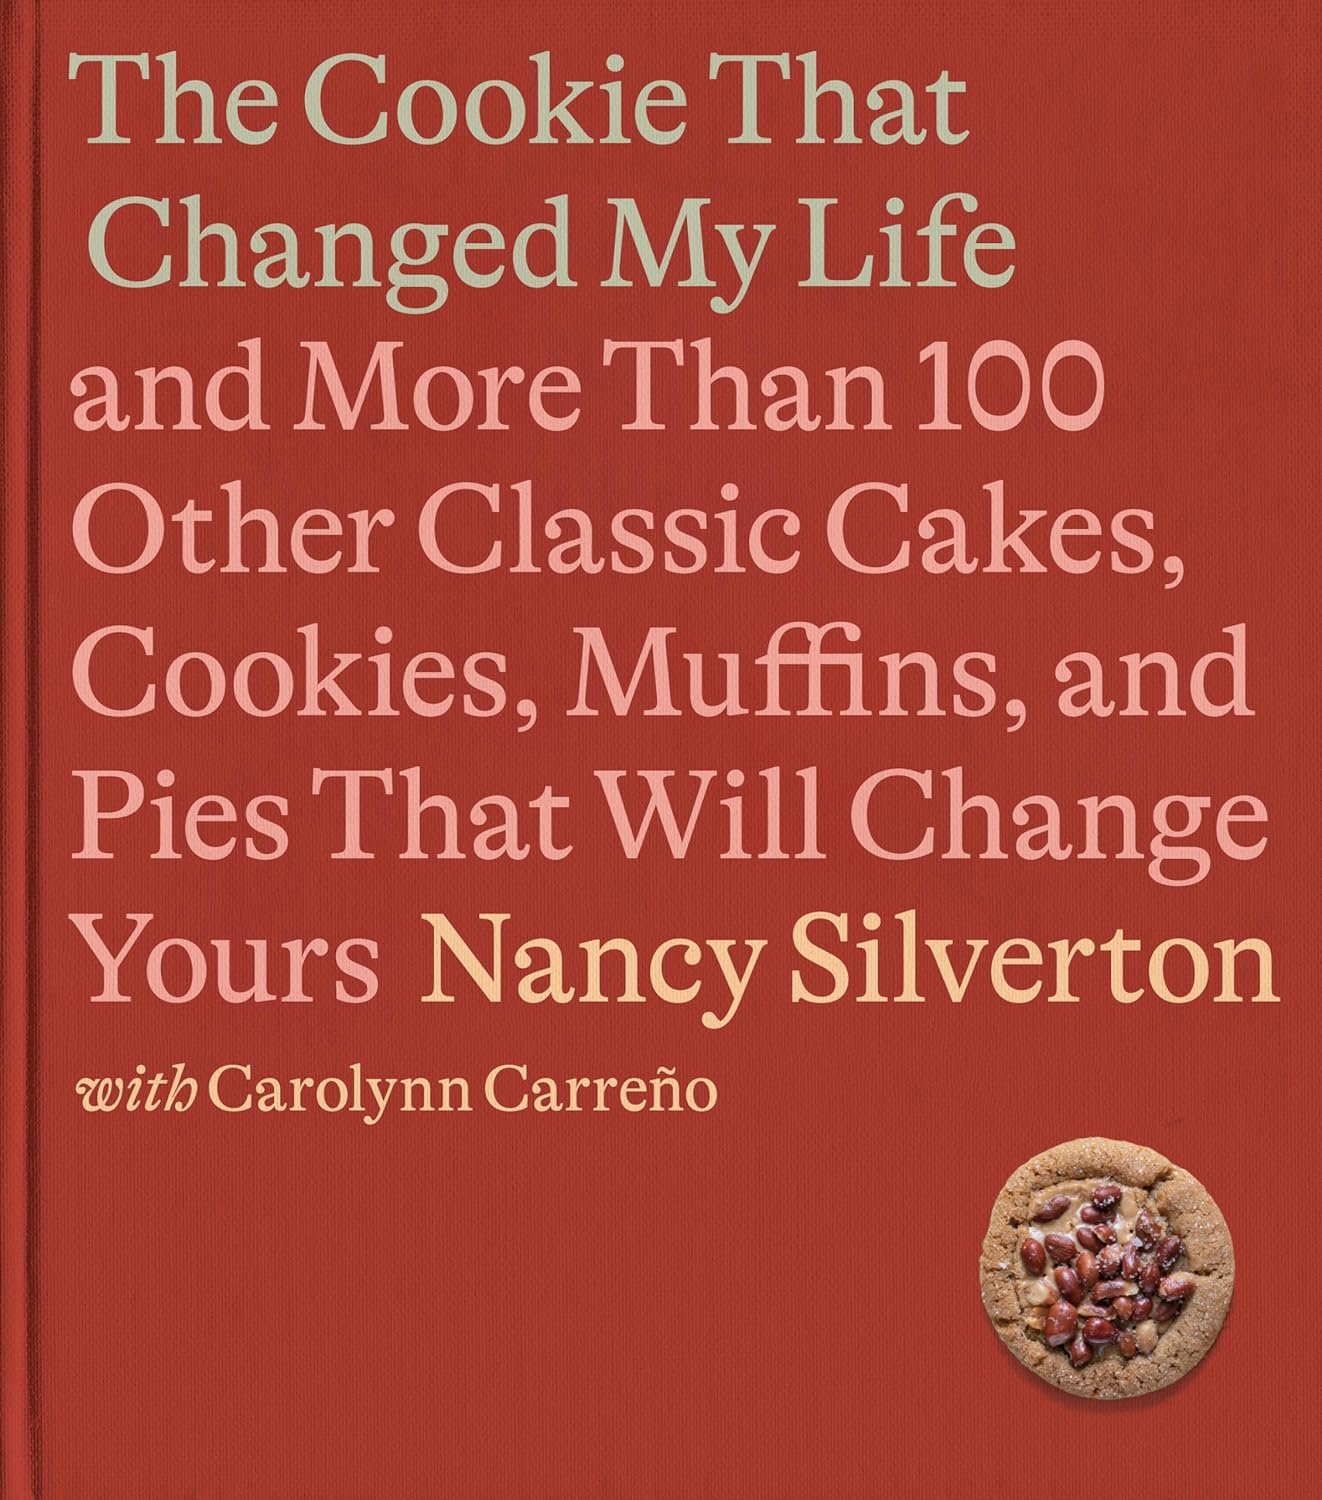 Front cover of the dessert cookbook "The Cookie that Changed my Life". Includes more than 100 other classic cakes, cookies, muffins, and pies that will be sure to impress. Dessert cookbook. 